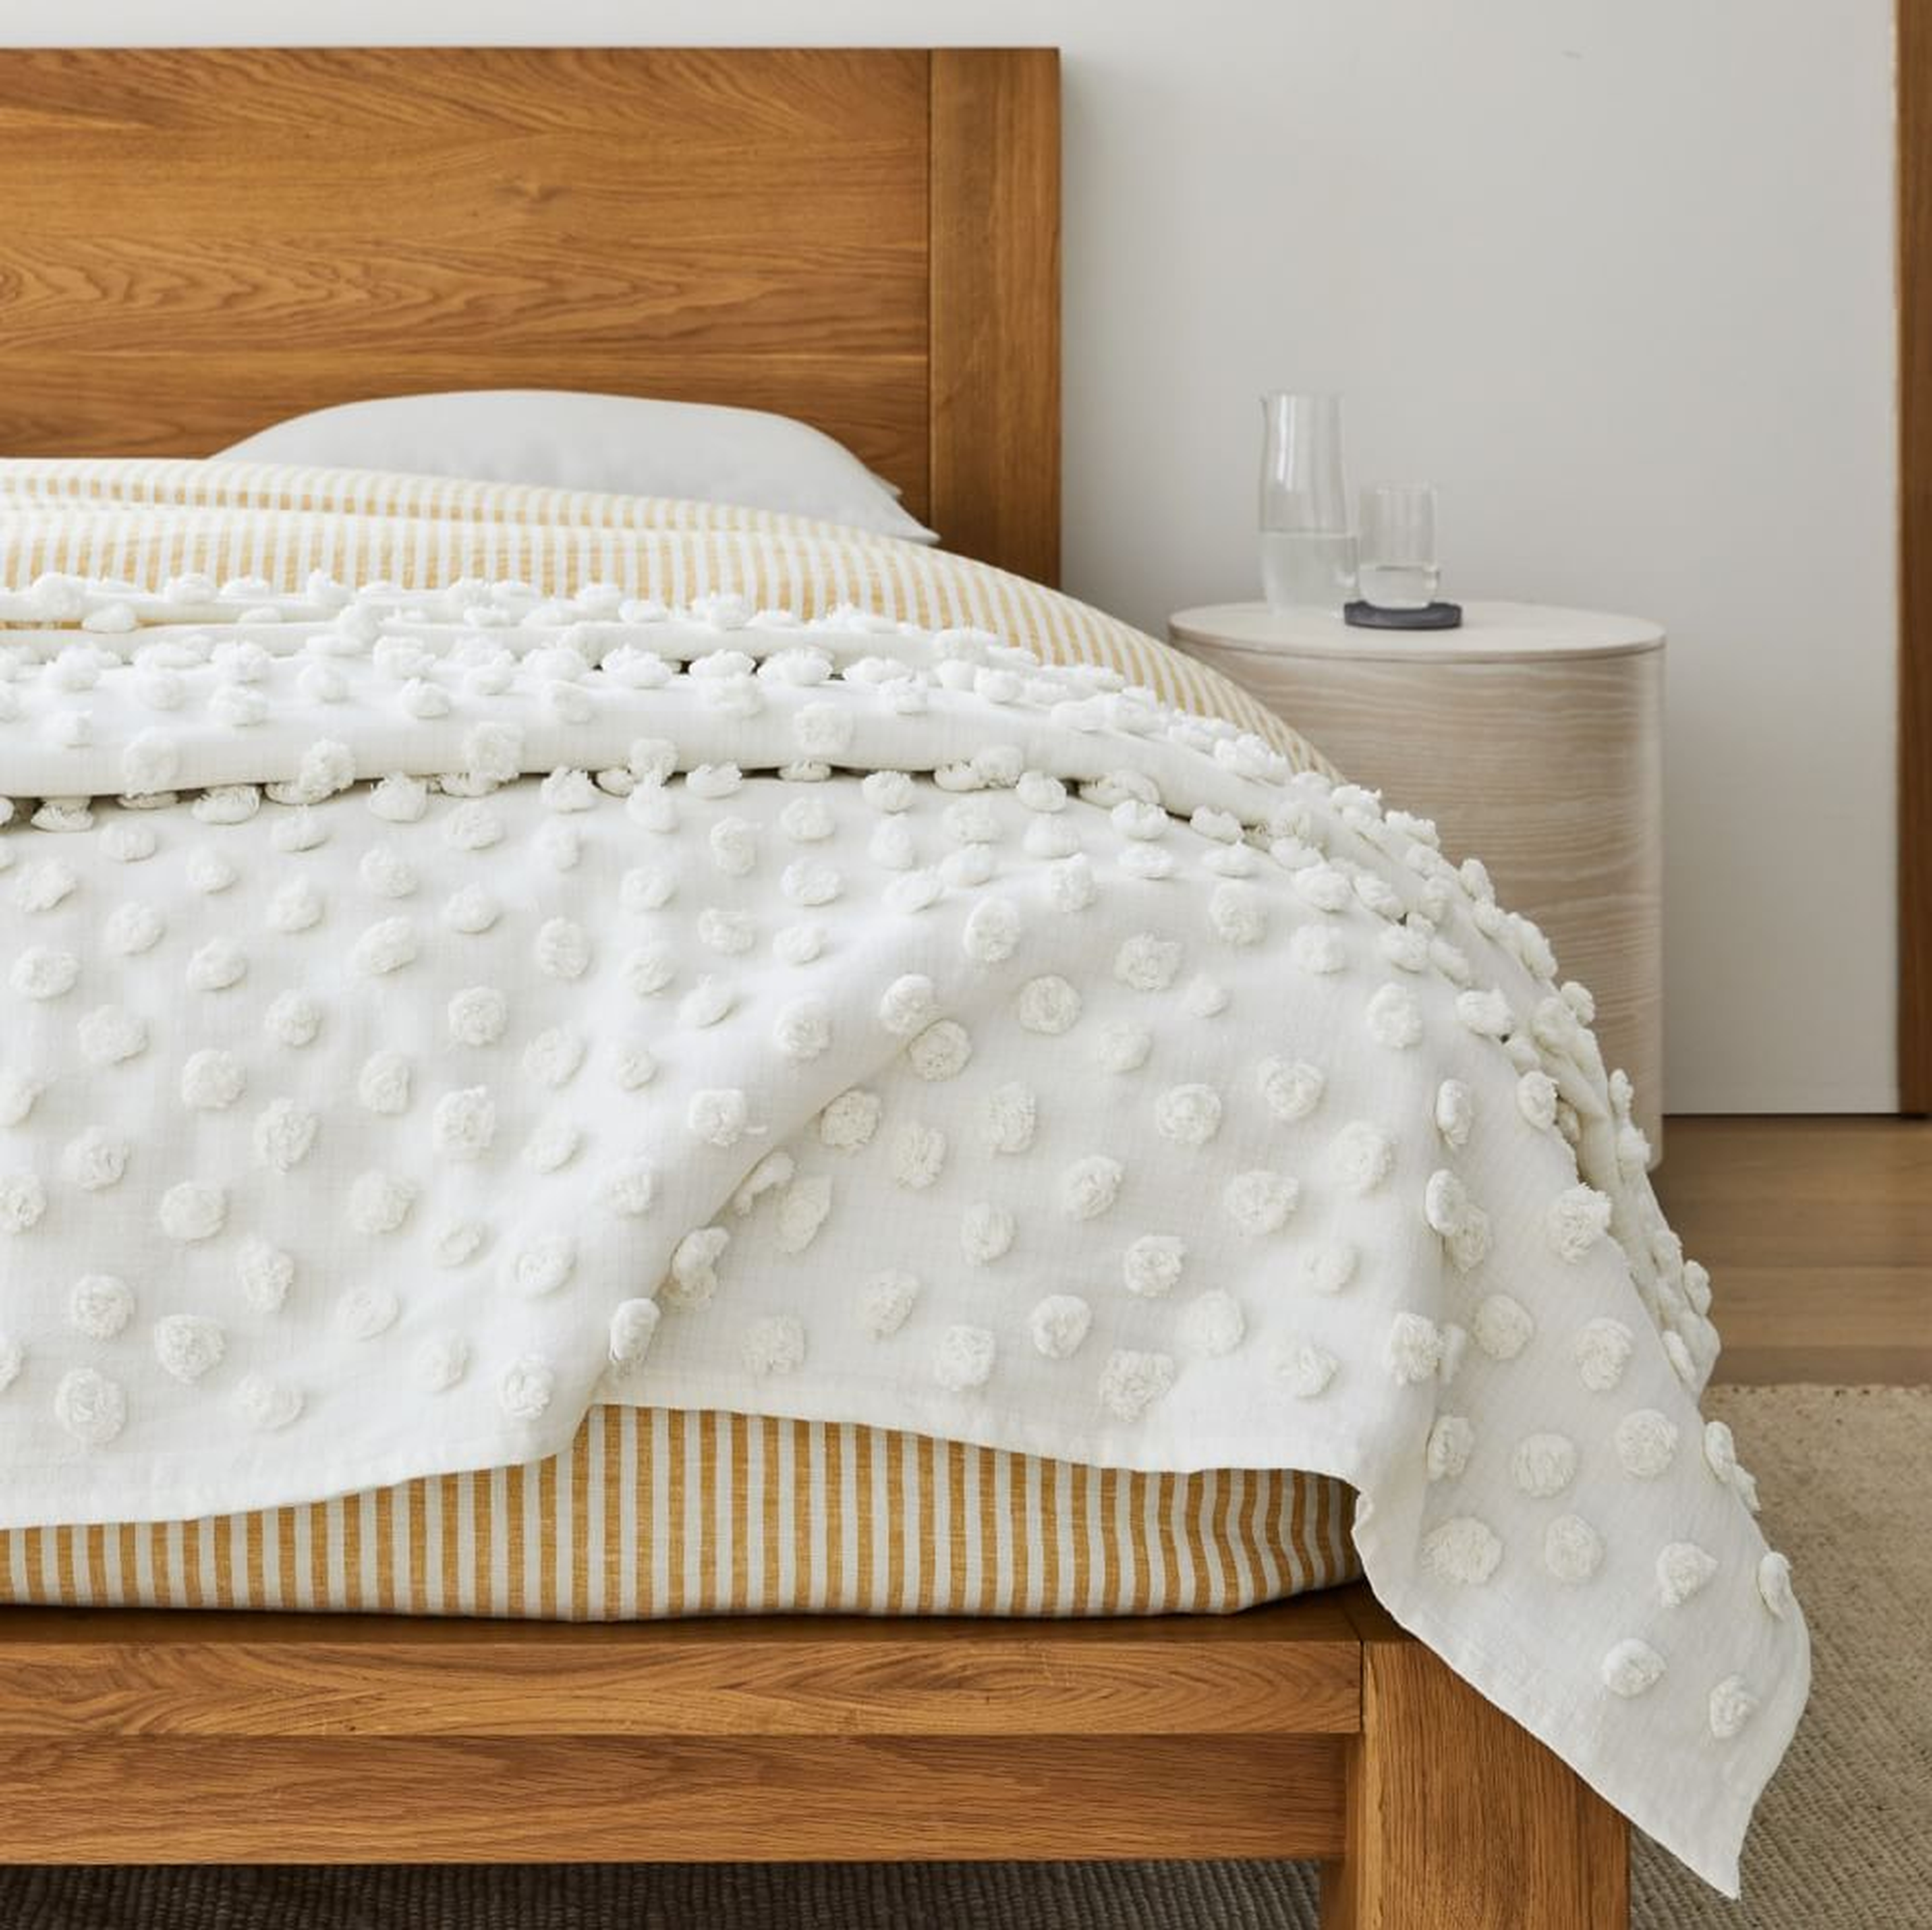 Candlewick Bed Blanket, Full/Queen, White - West Elm